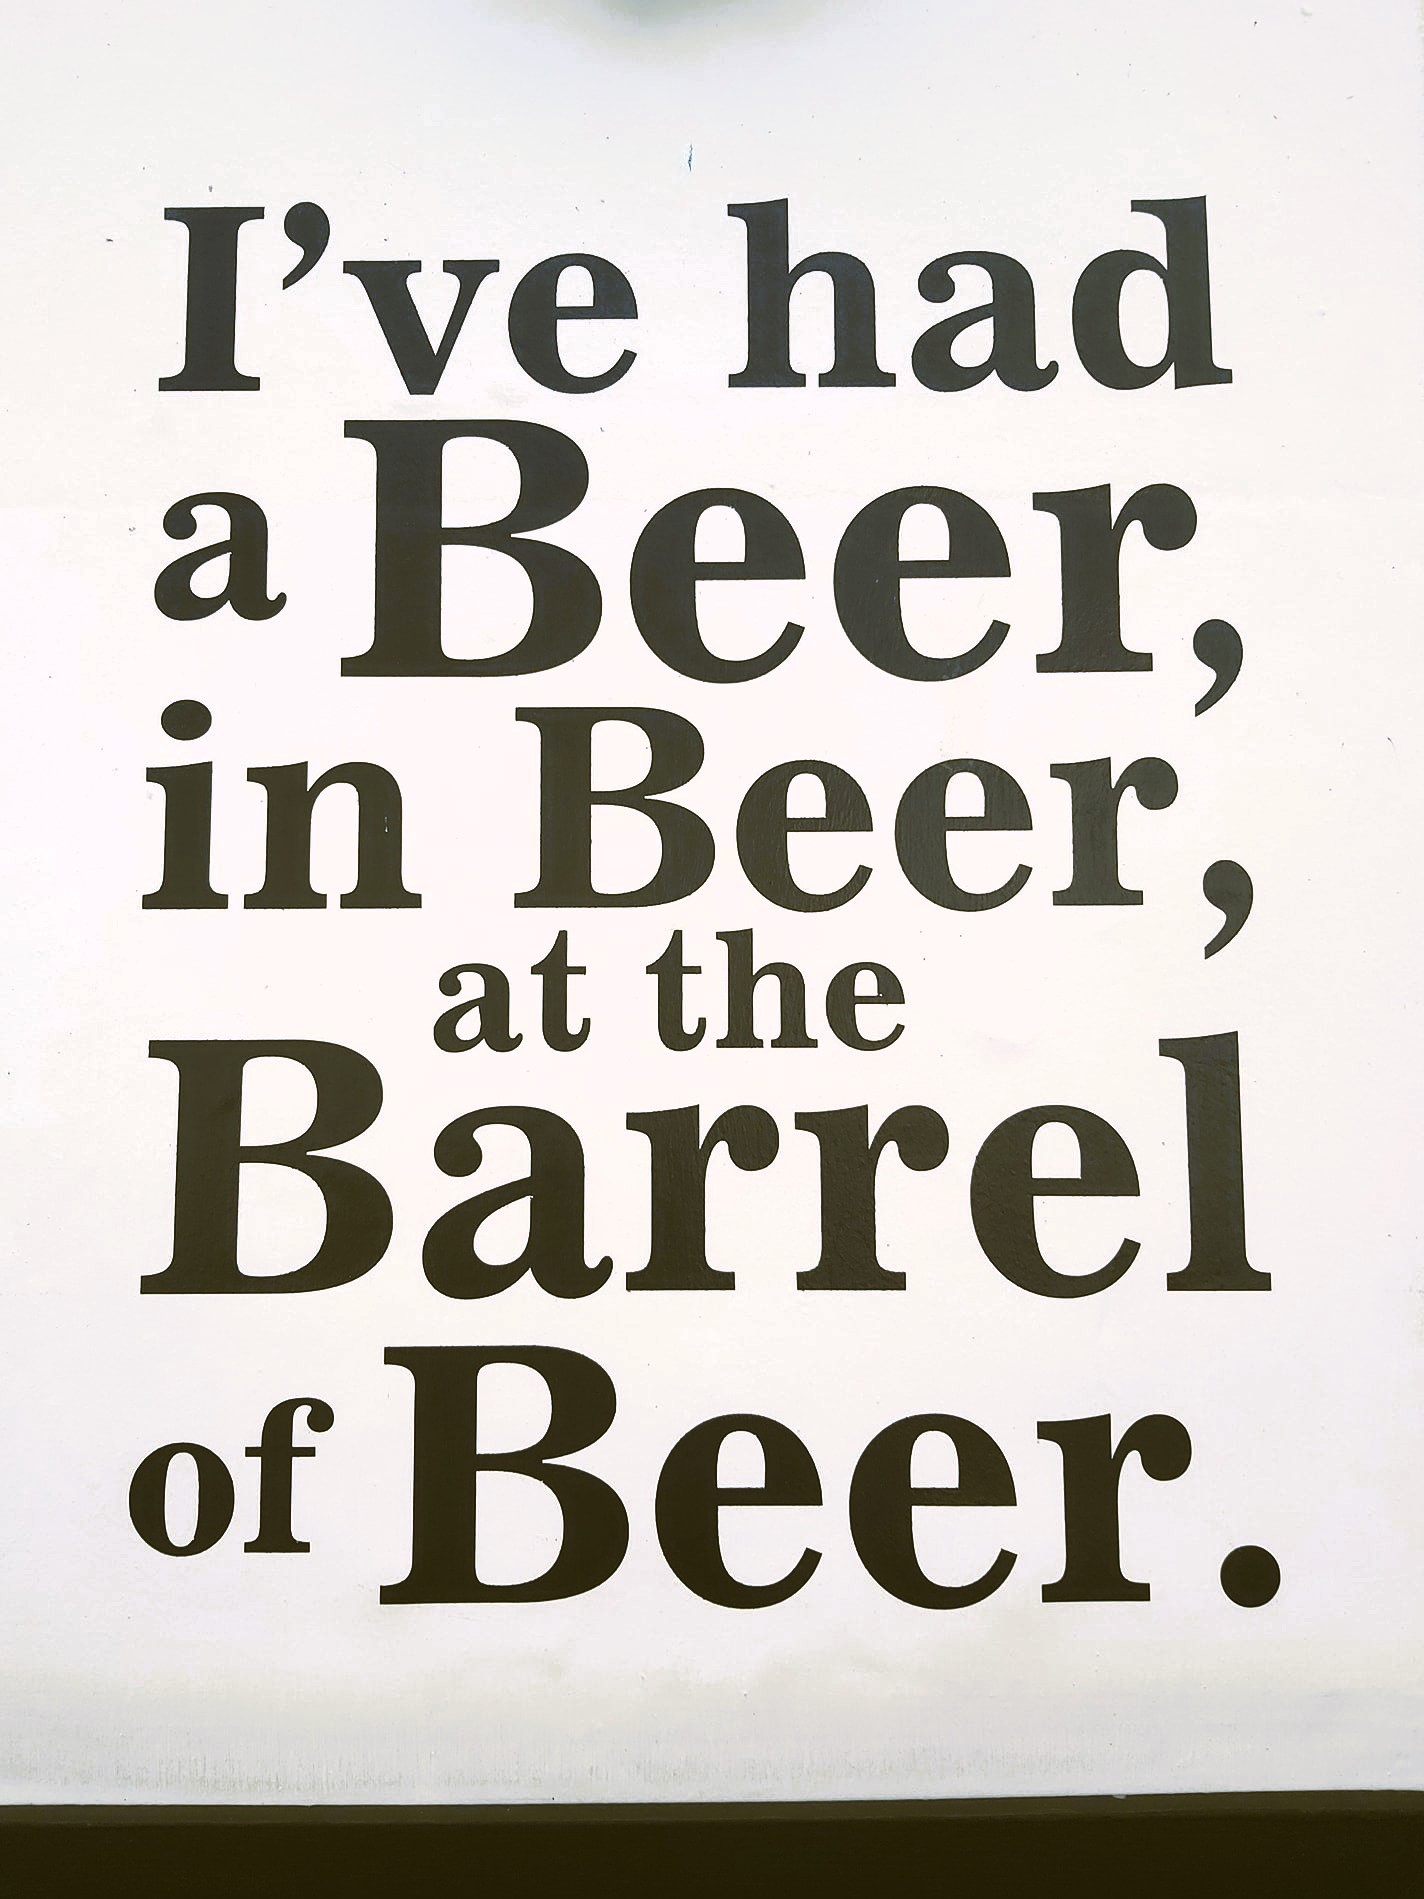 A sign reading "I've had a beer, in Beer, at the Barrel of Beer" in Beer, Devon, England.